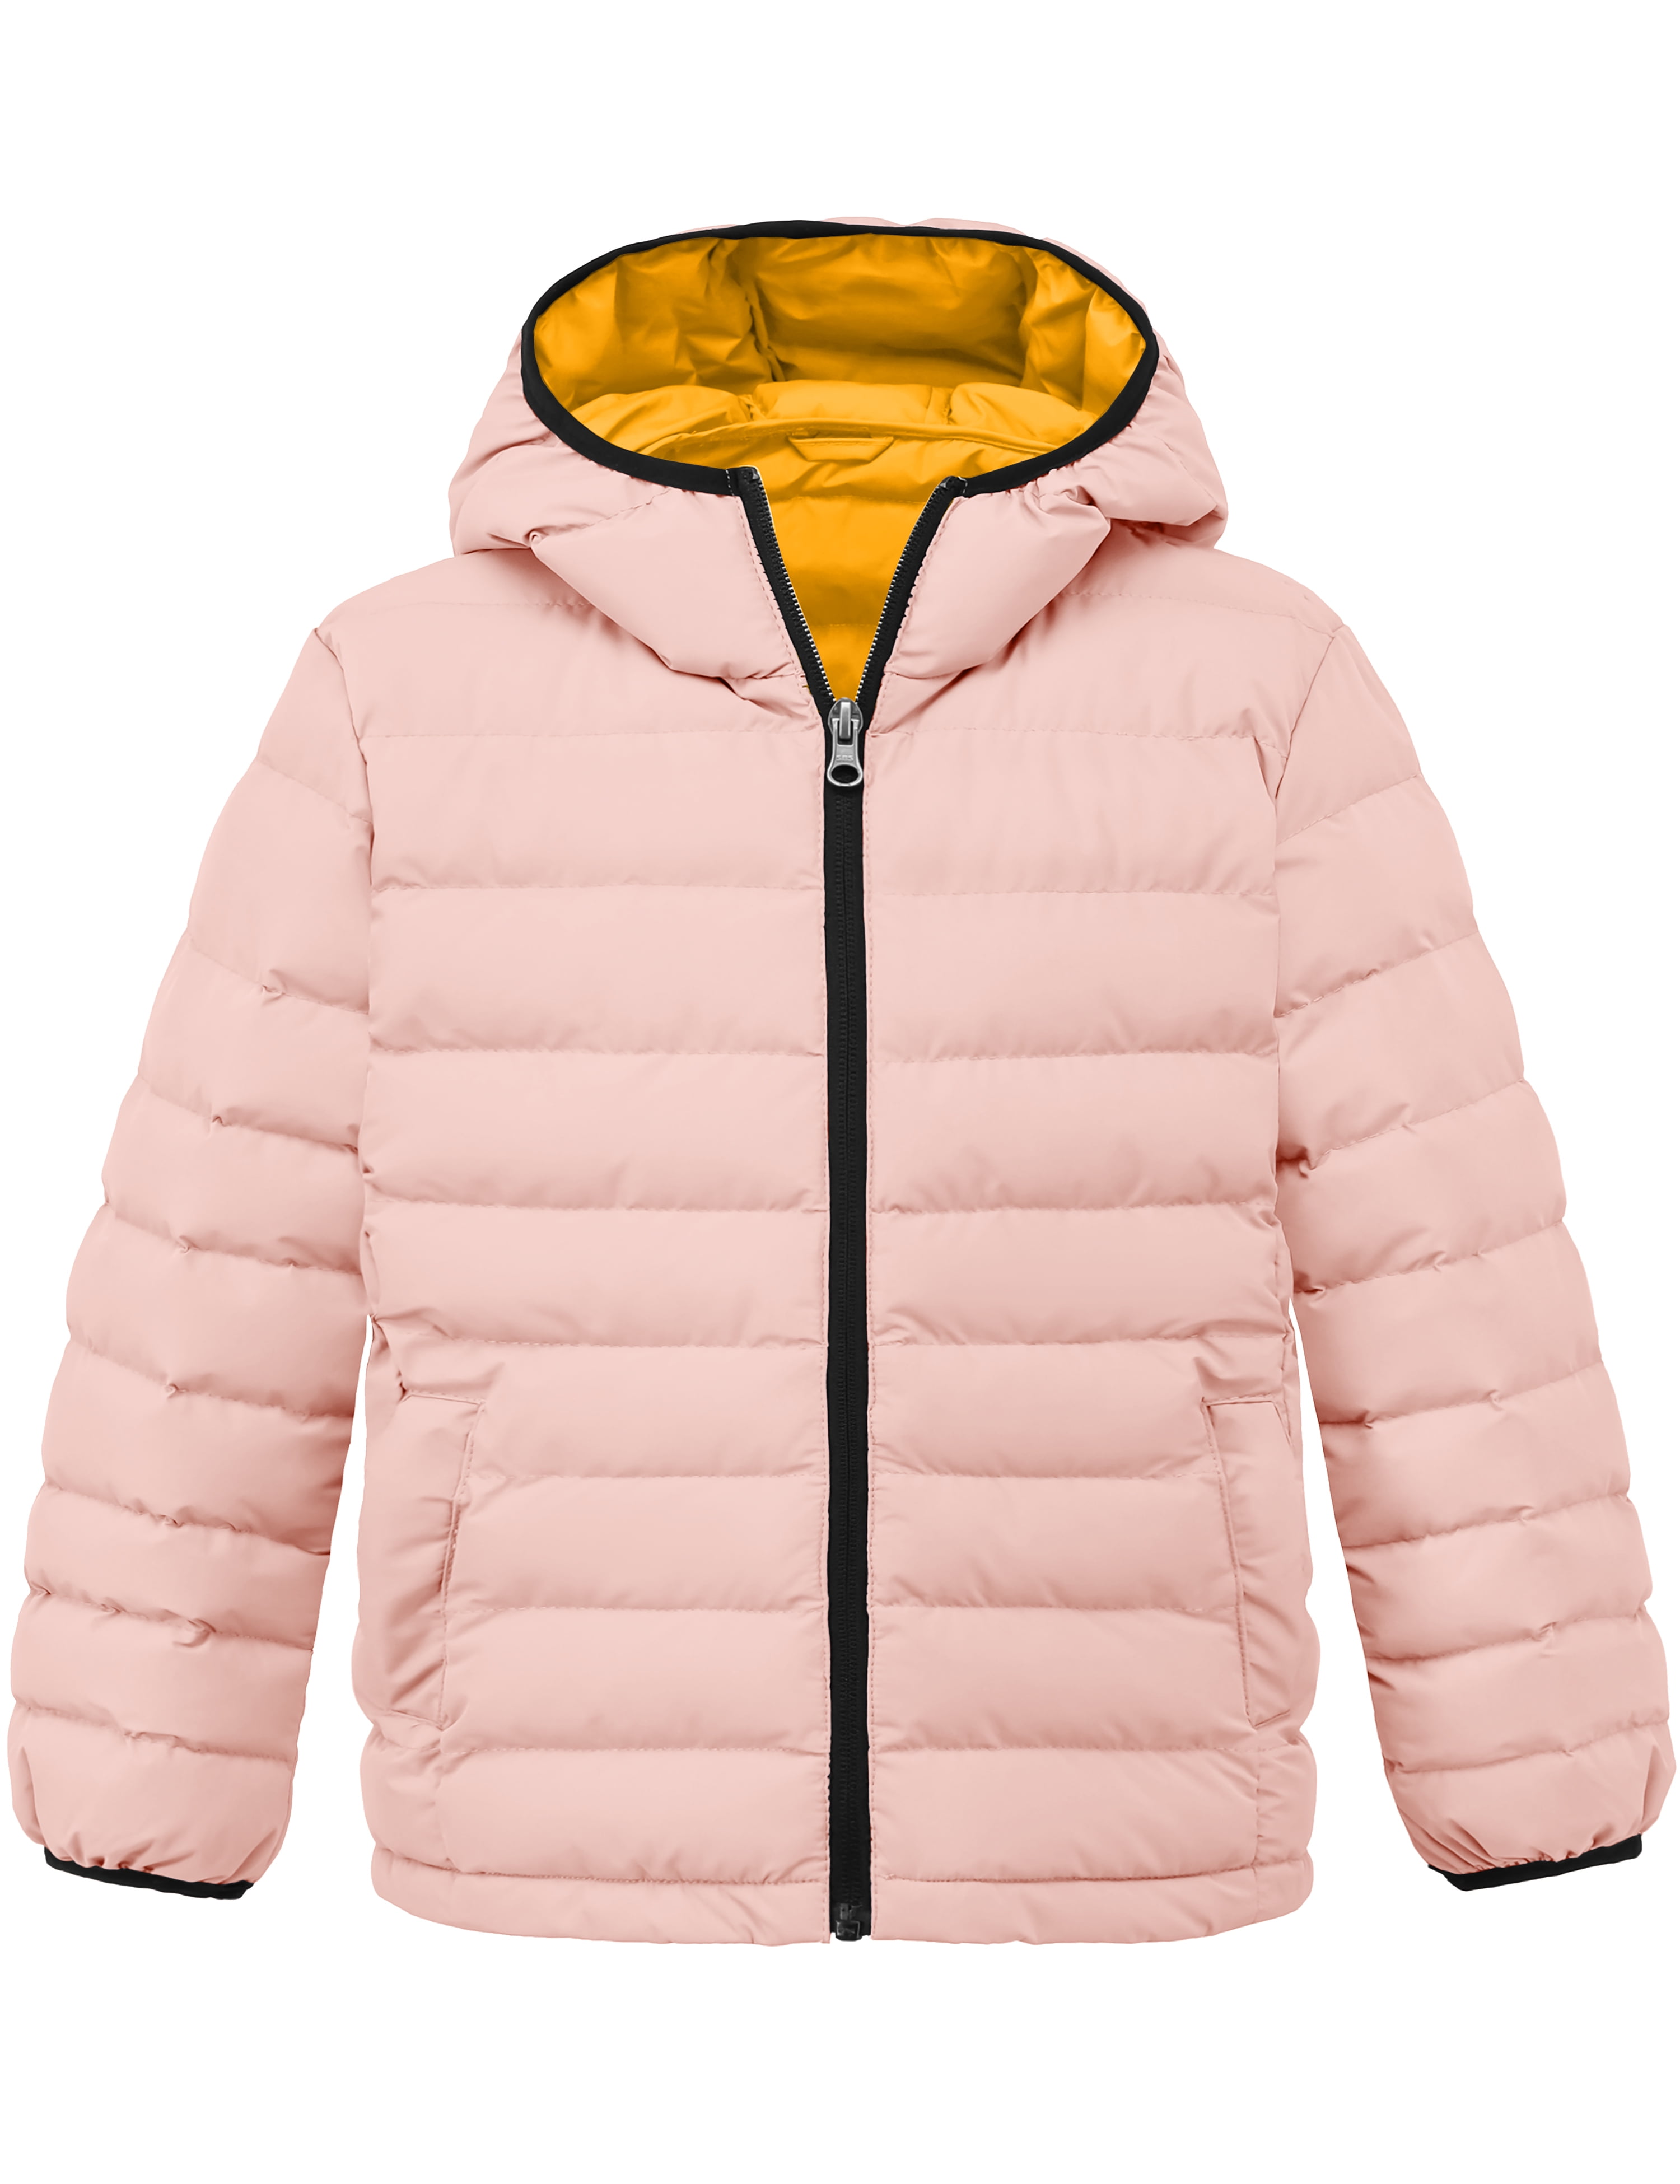 Details about   Hudson Pink Puffer Parka Winter Jacket  Coat Embroidered Size 2T H4385T680 